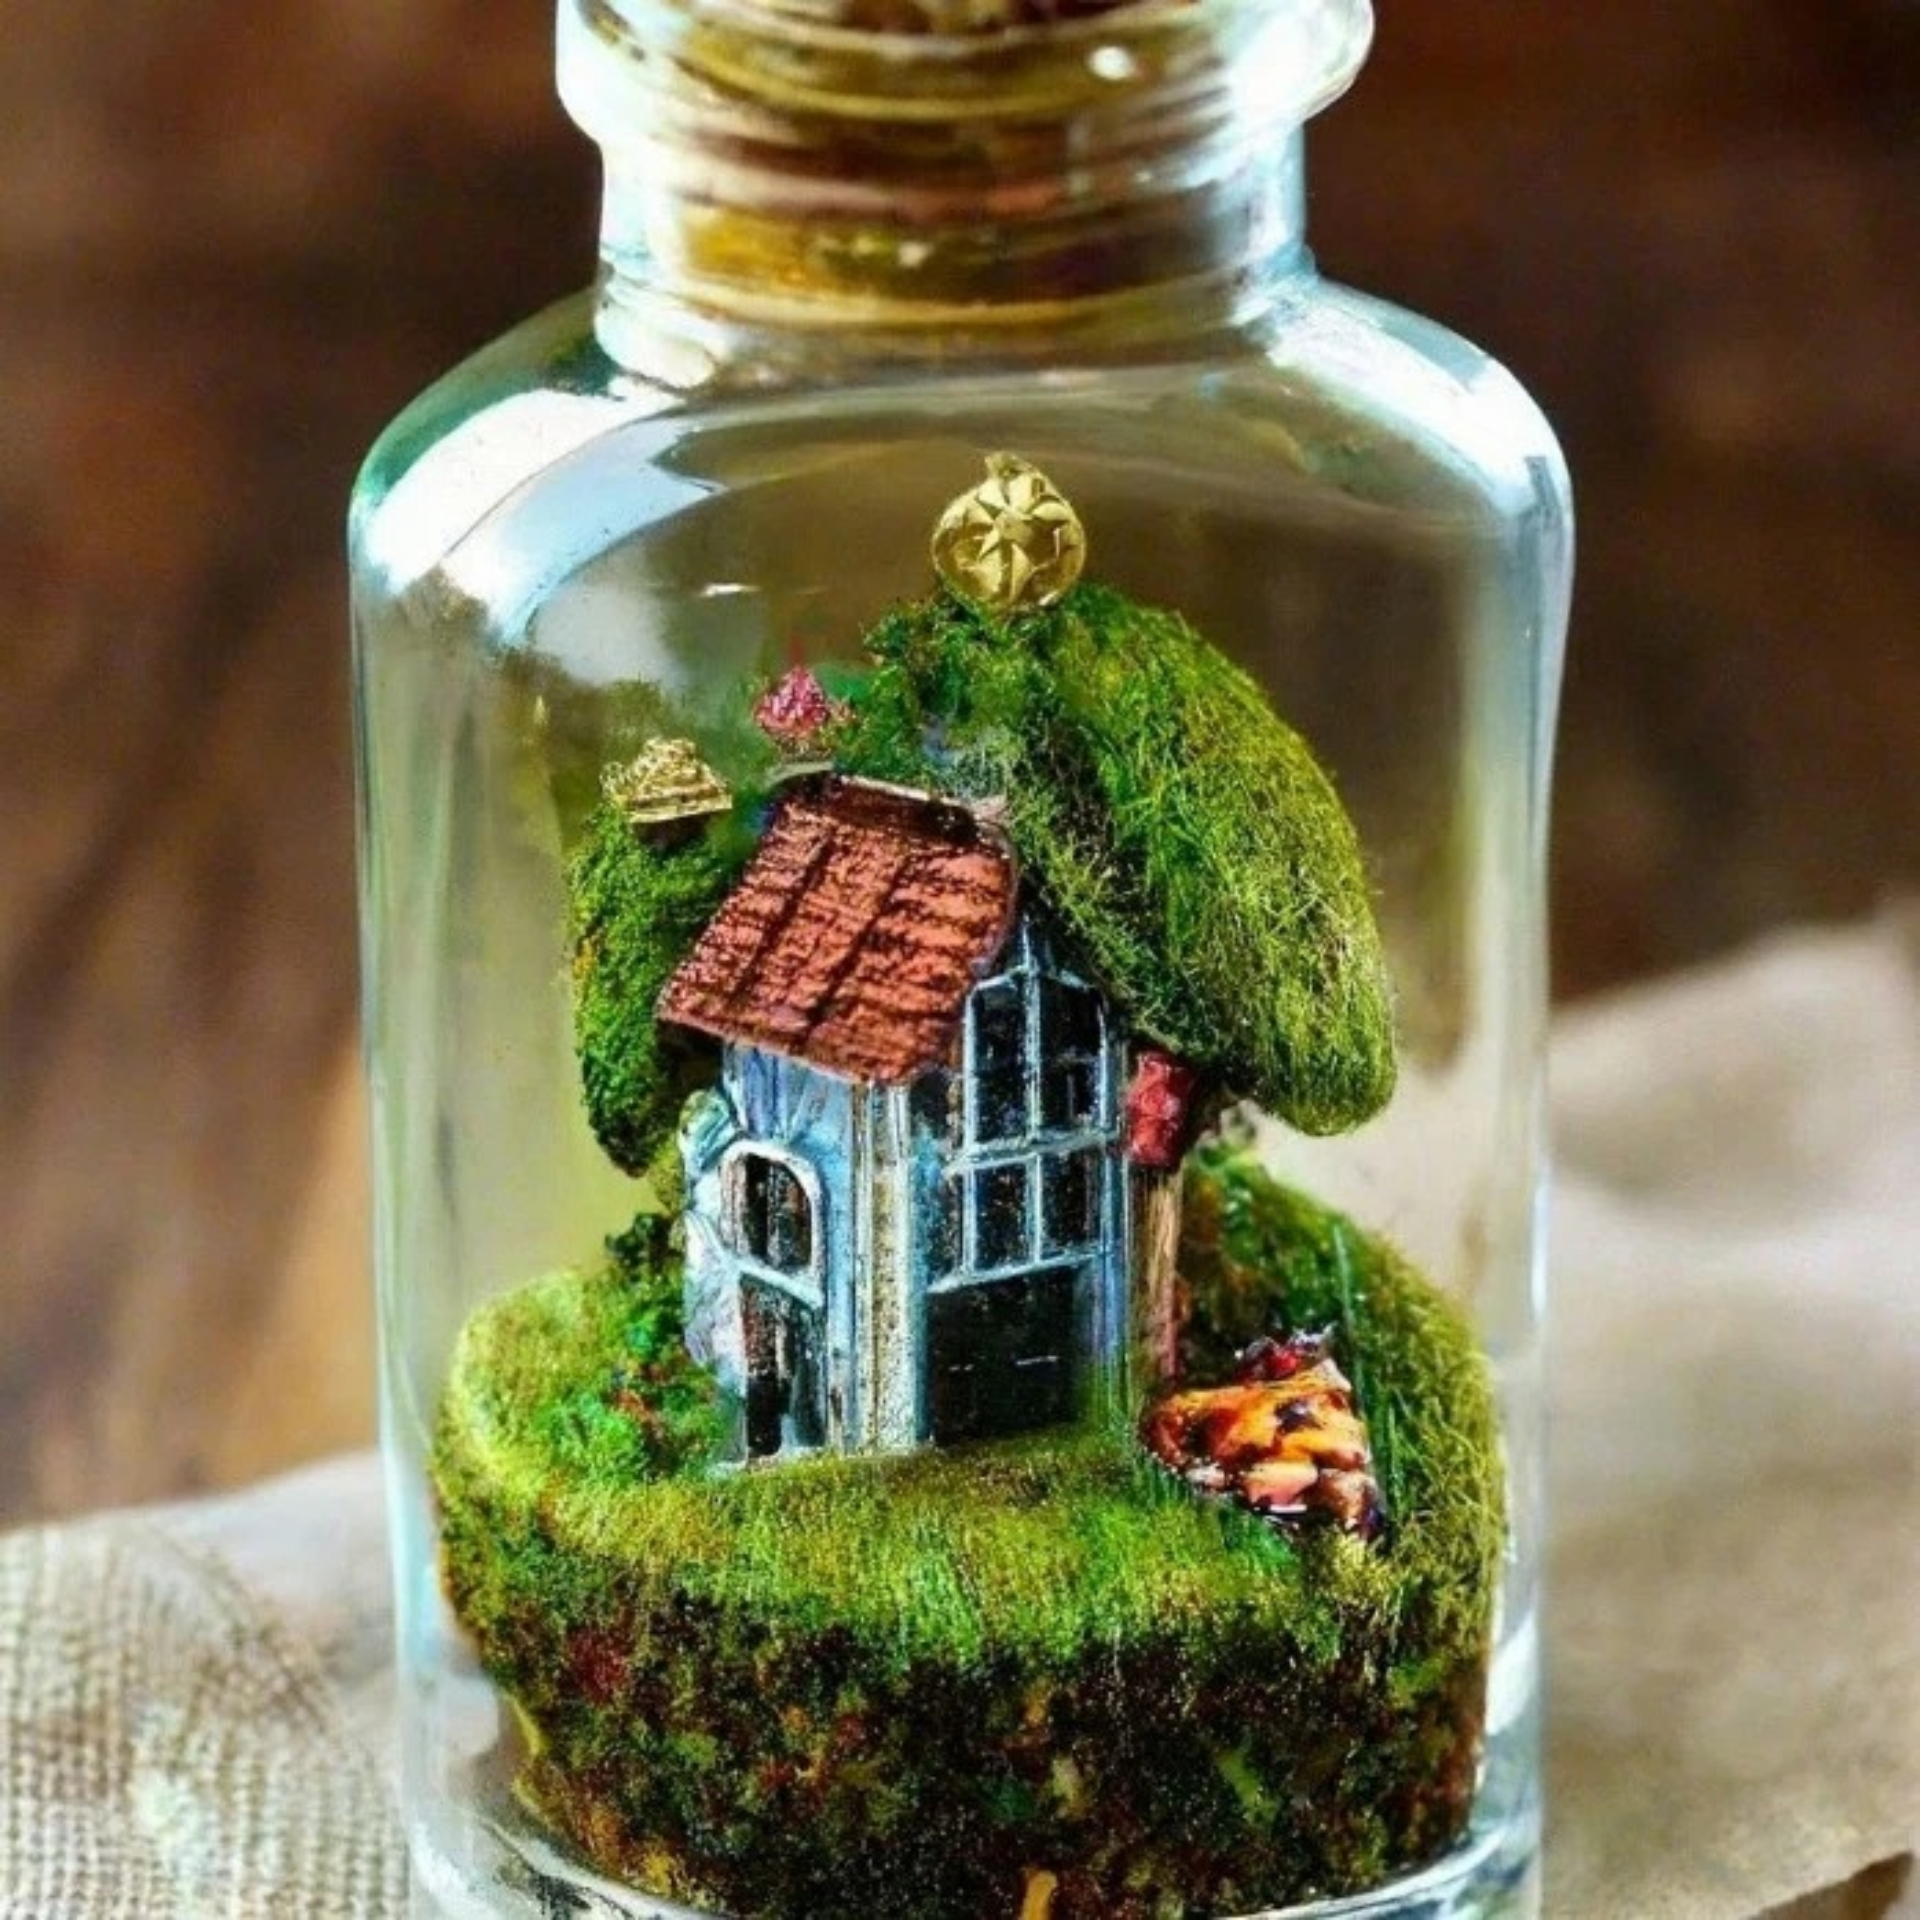 A small decorative house in a bottle